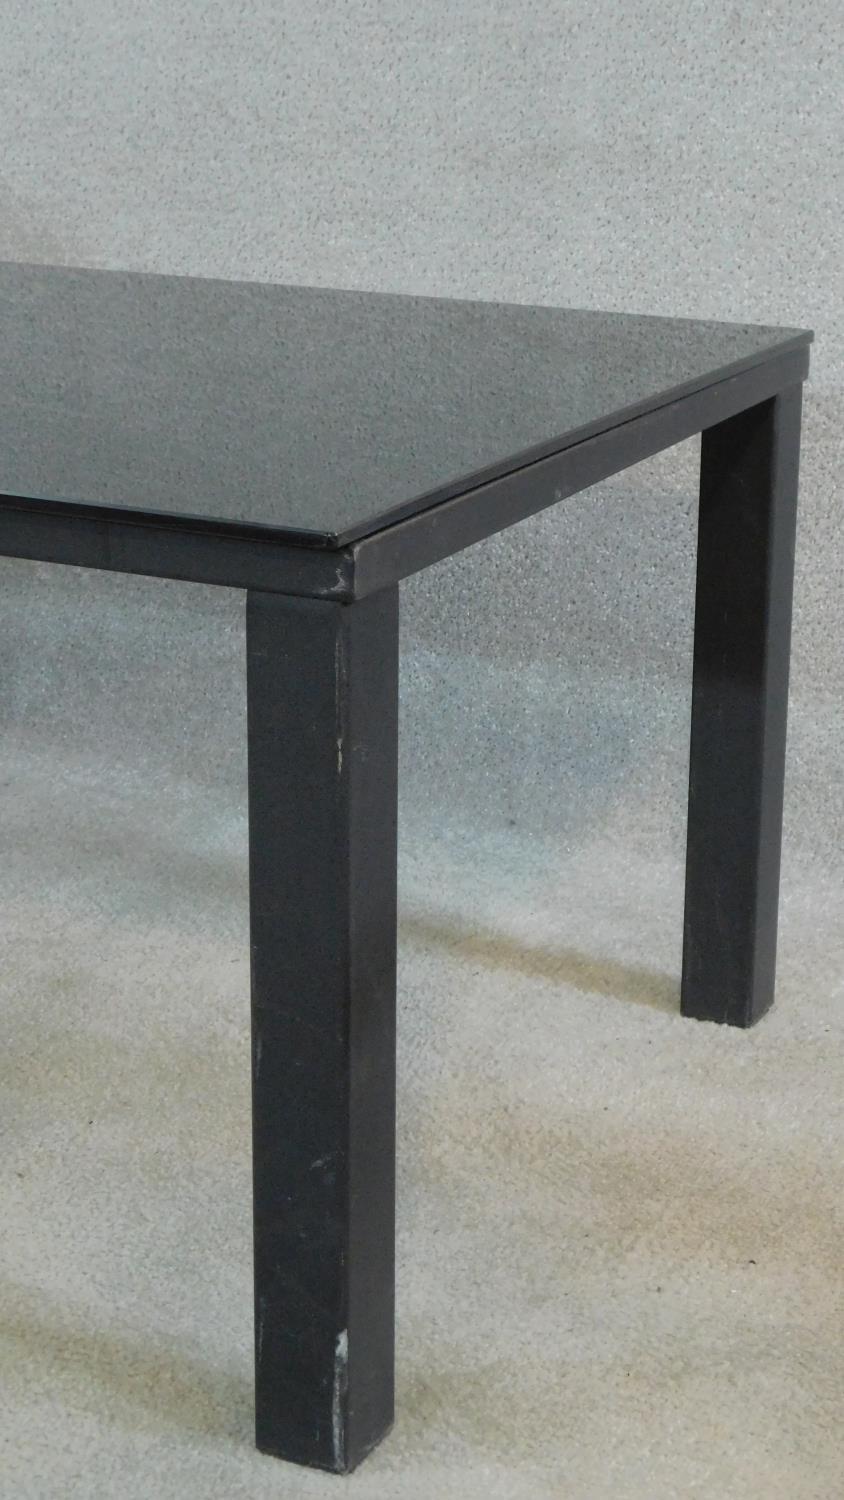 A contemporary low table with dark plate glass top on metal framed base. H.46 L.120 D.65cm - Image 3 of 5